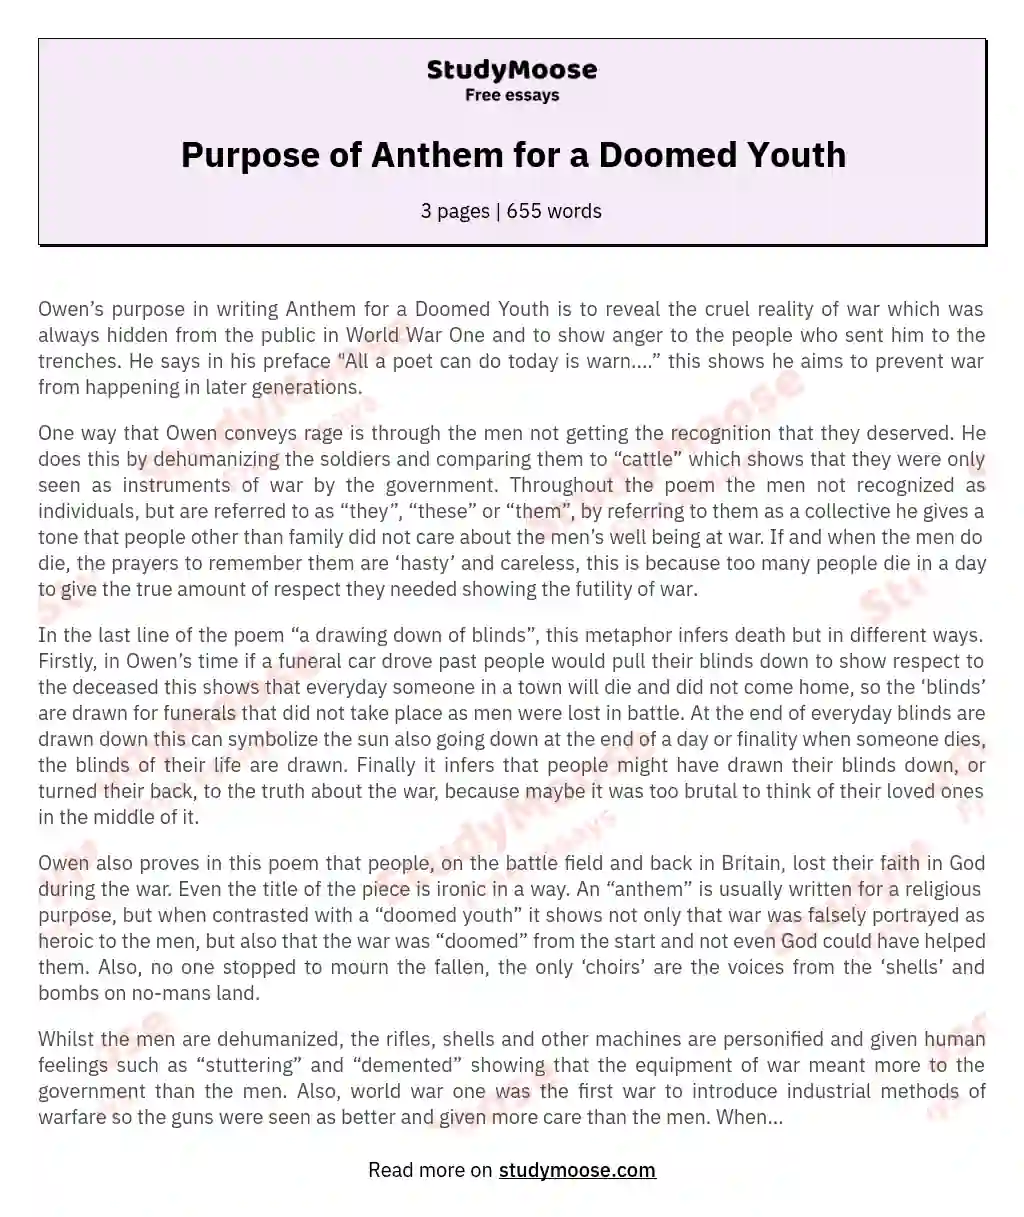 Purpose of Anthem for a Doomed Youth essay